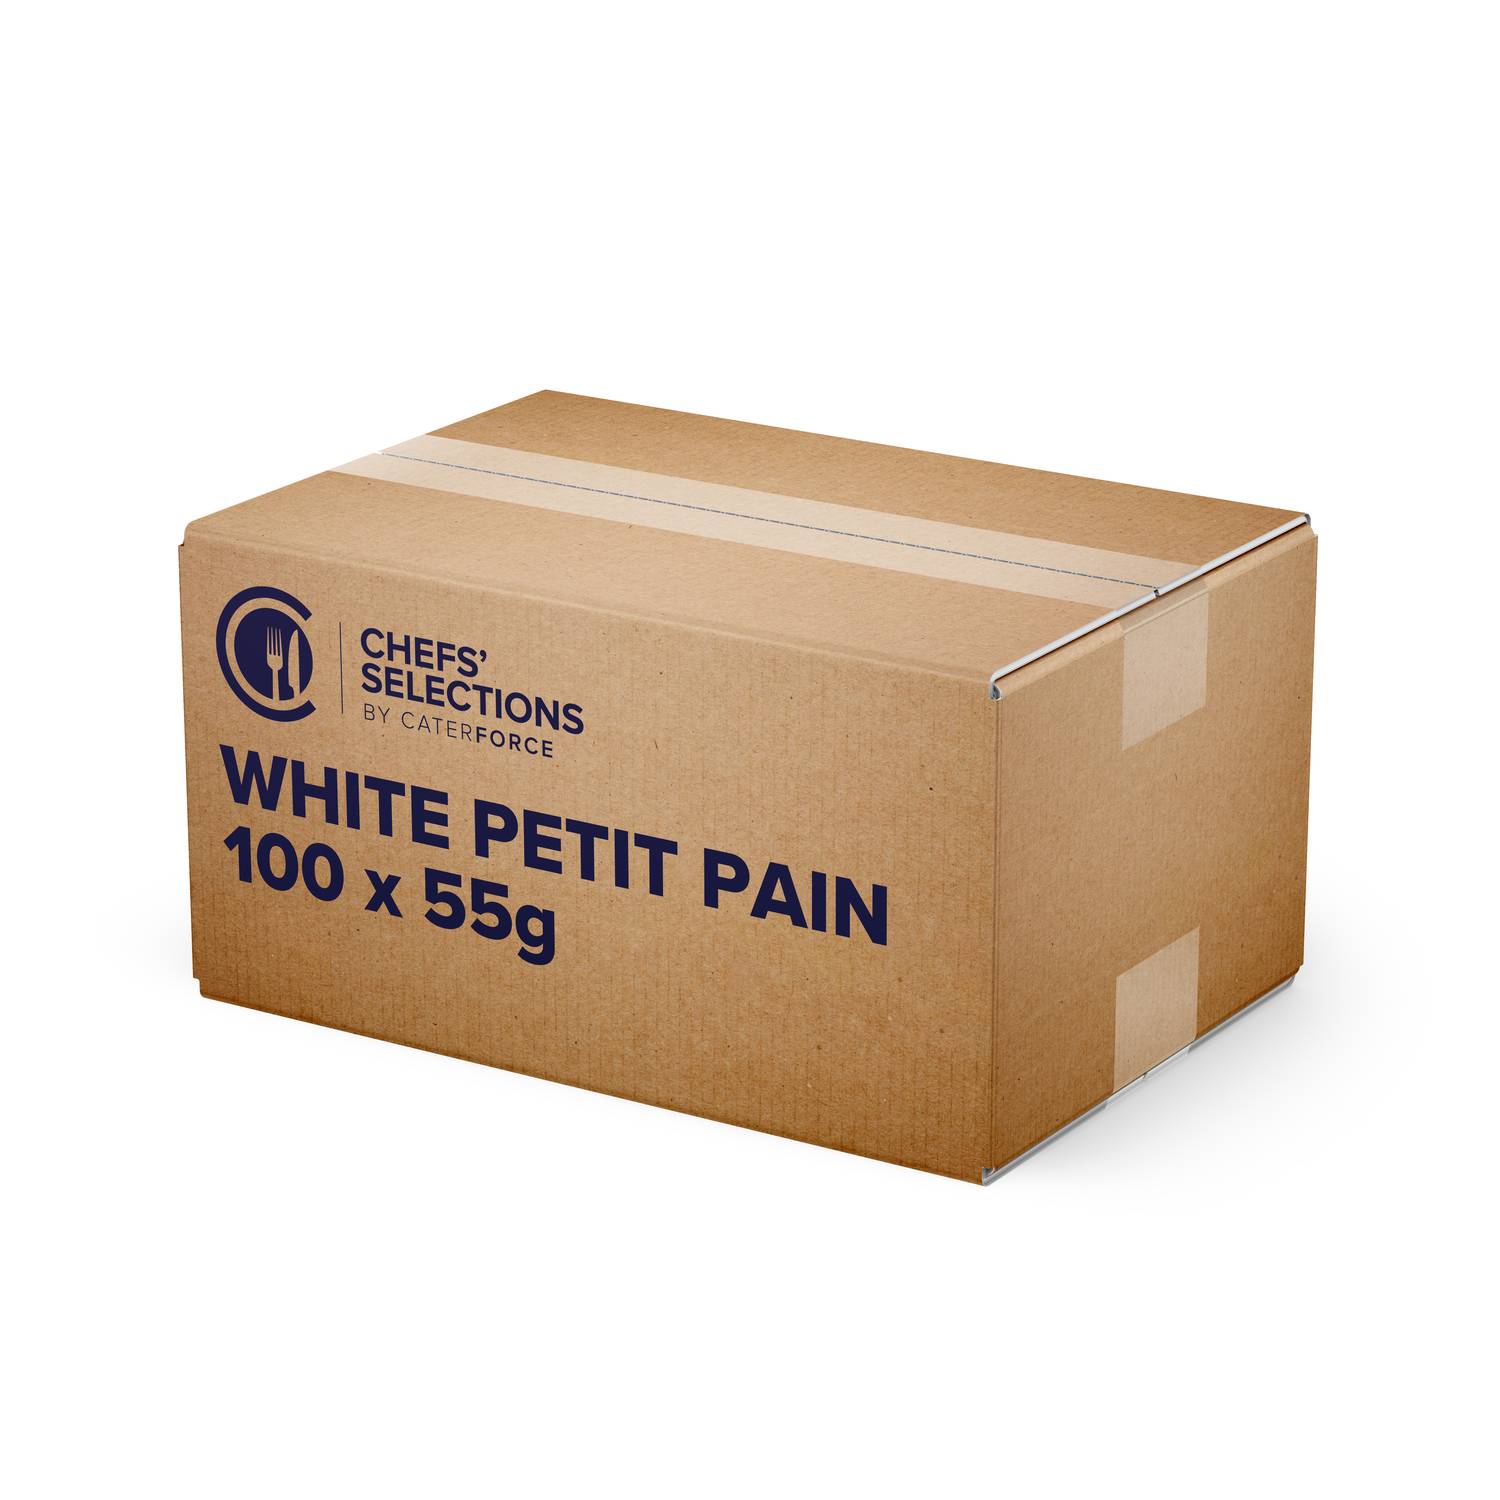 Chefs’ Selections White Petit Pain (100 x 55g)